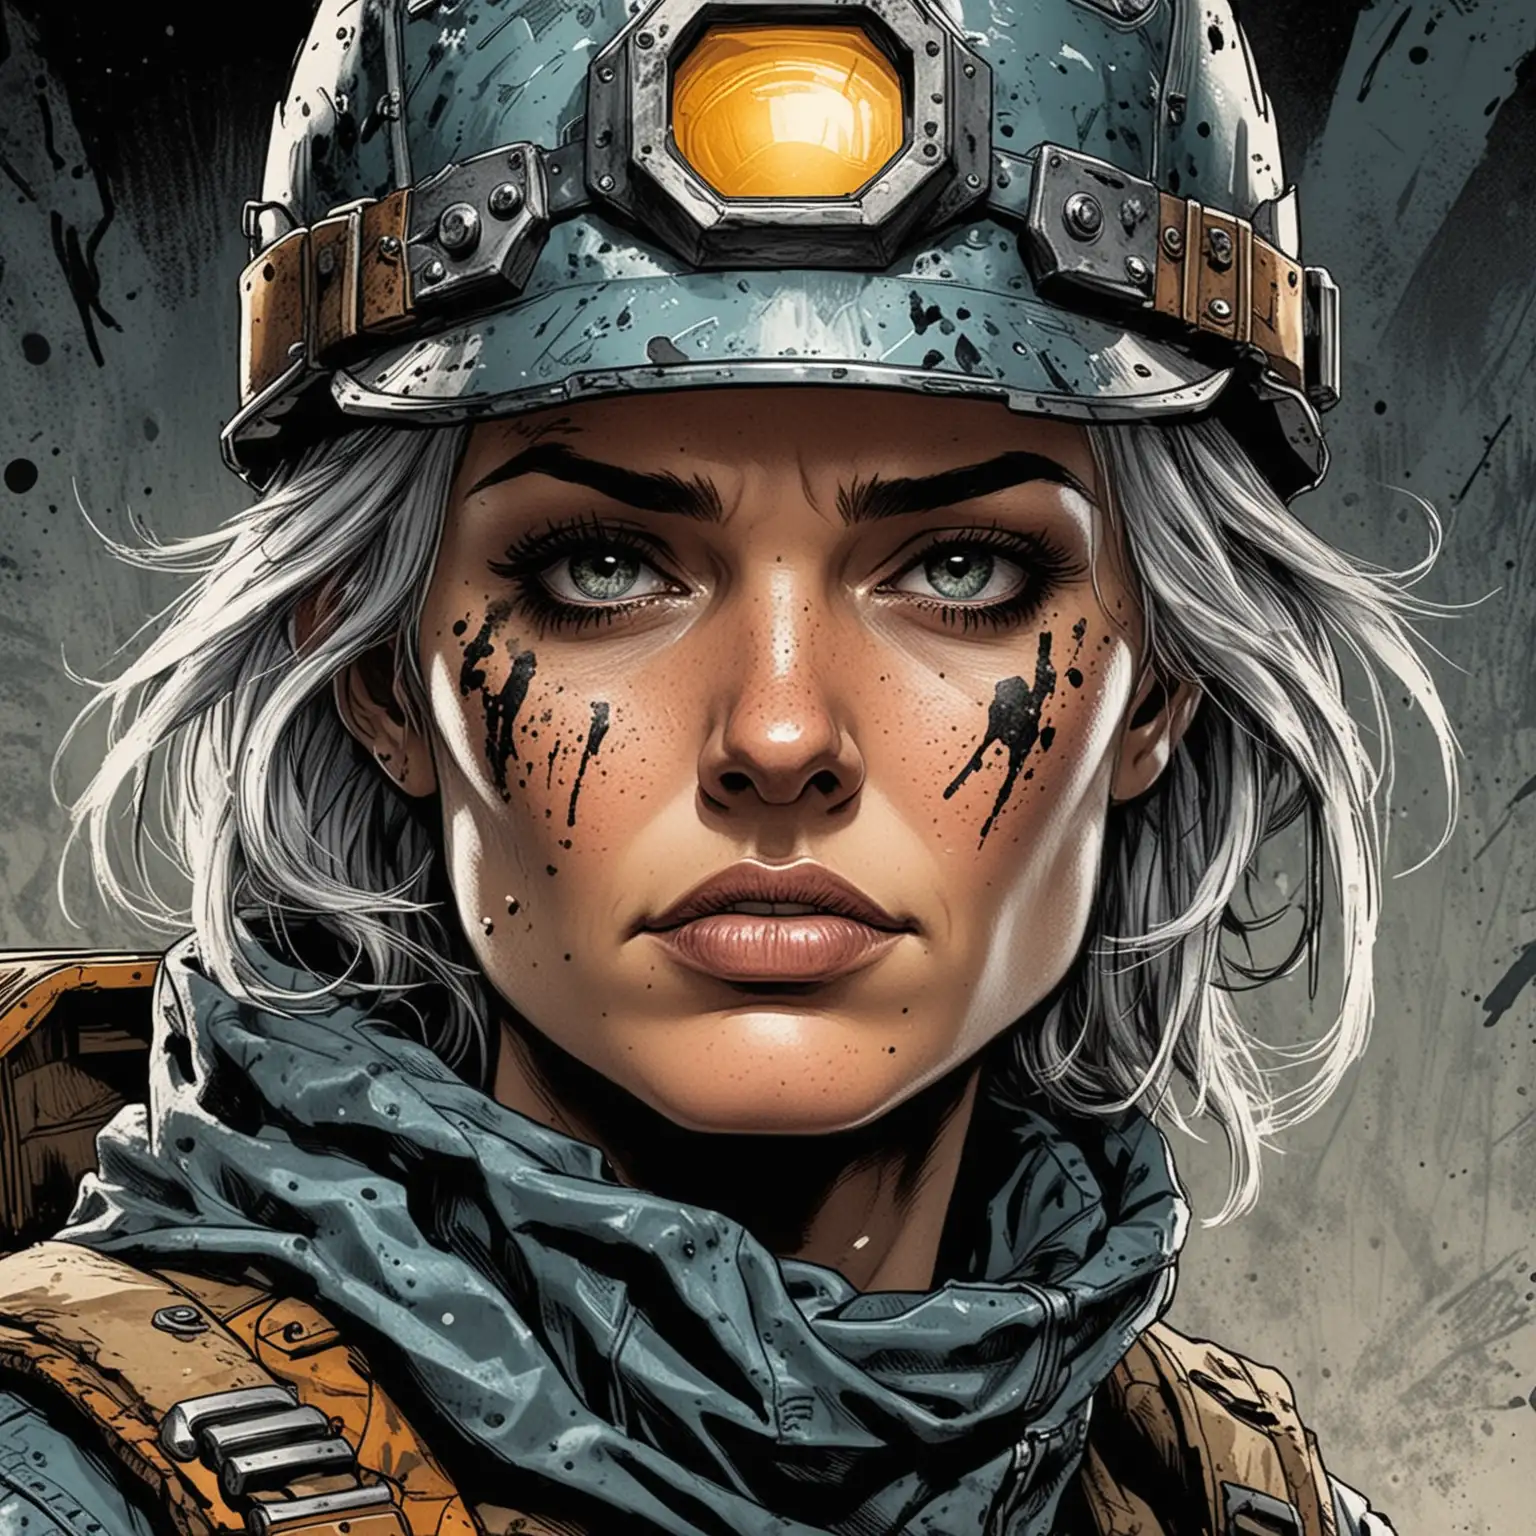 comic book inked color art style; close up portrait; grizzled female miner in futuristic protective gear